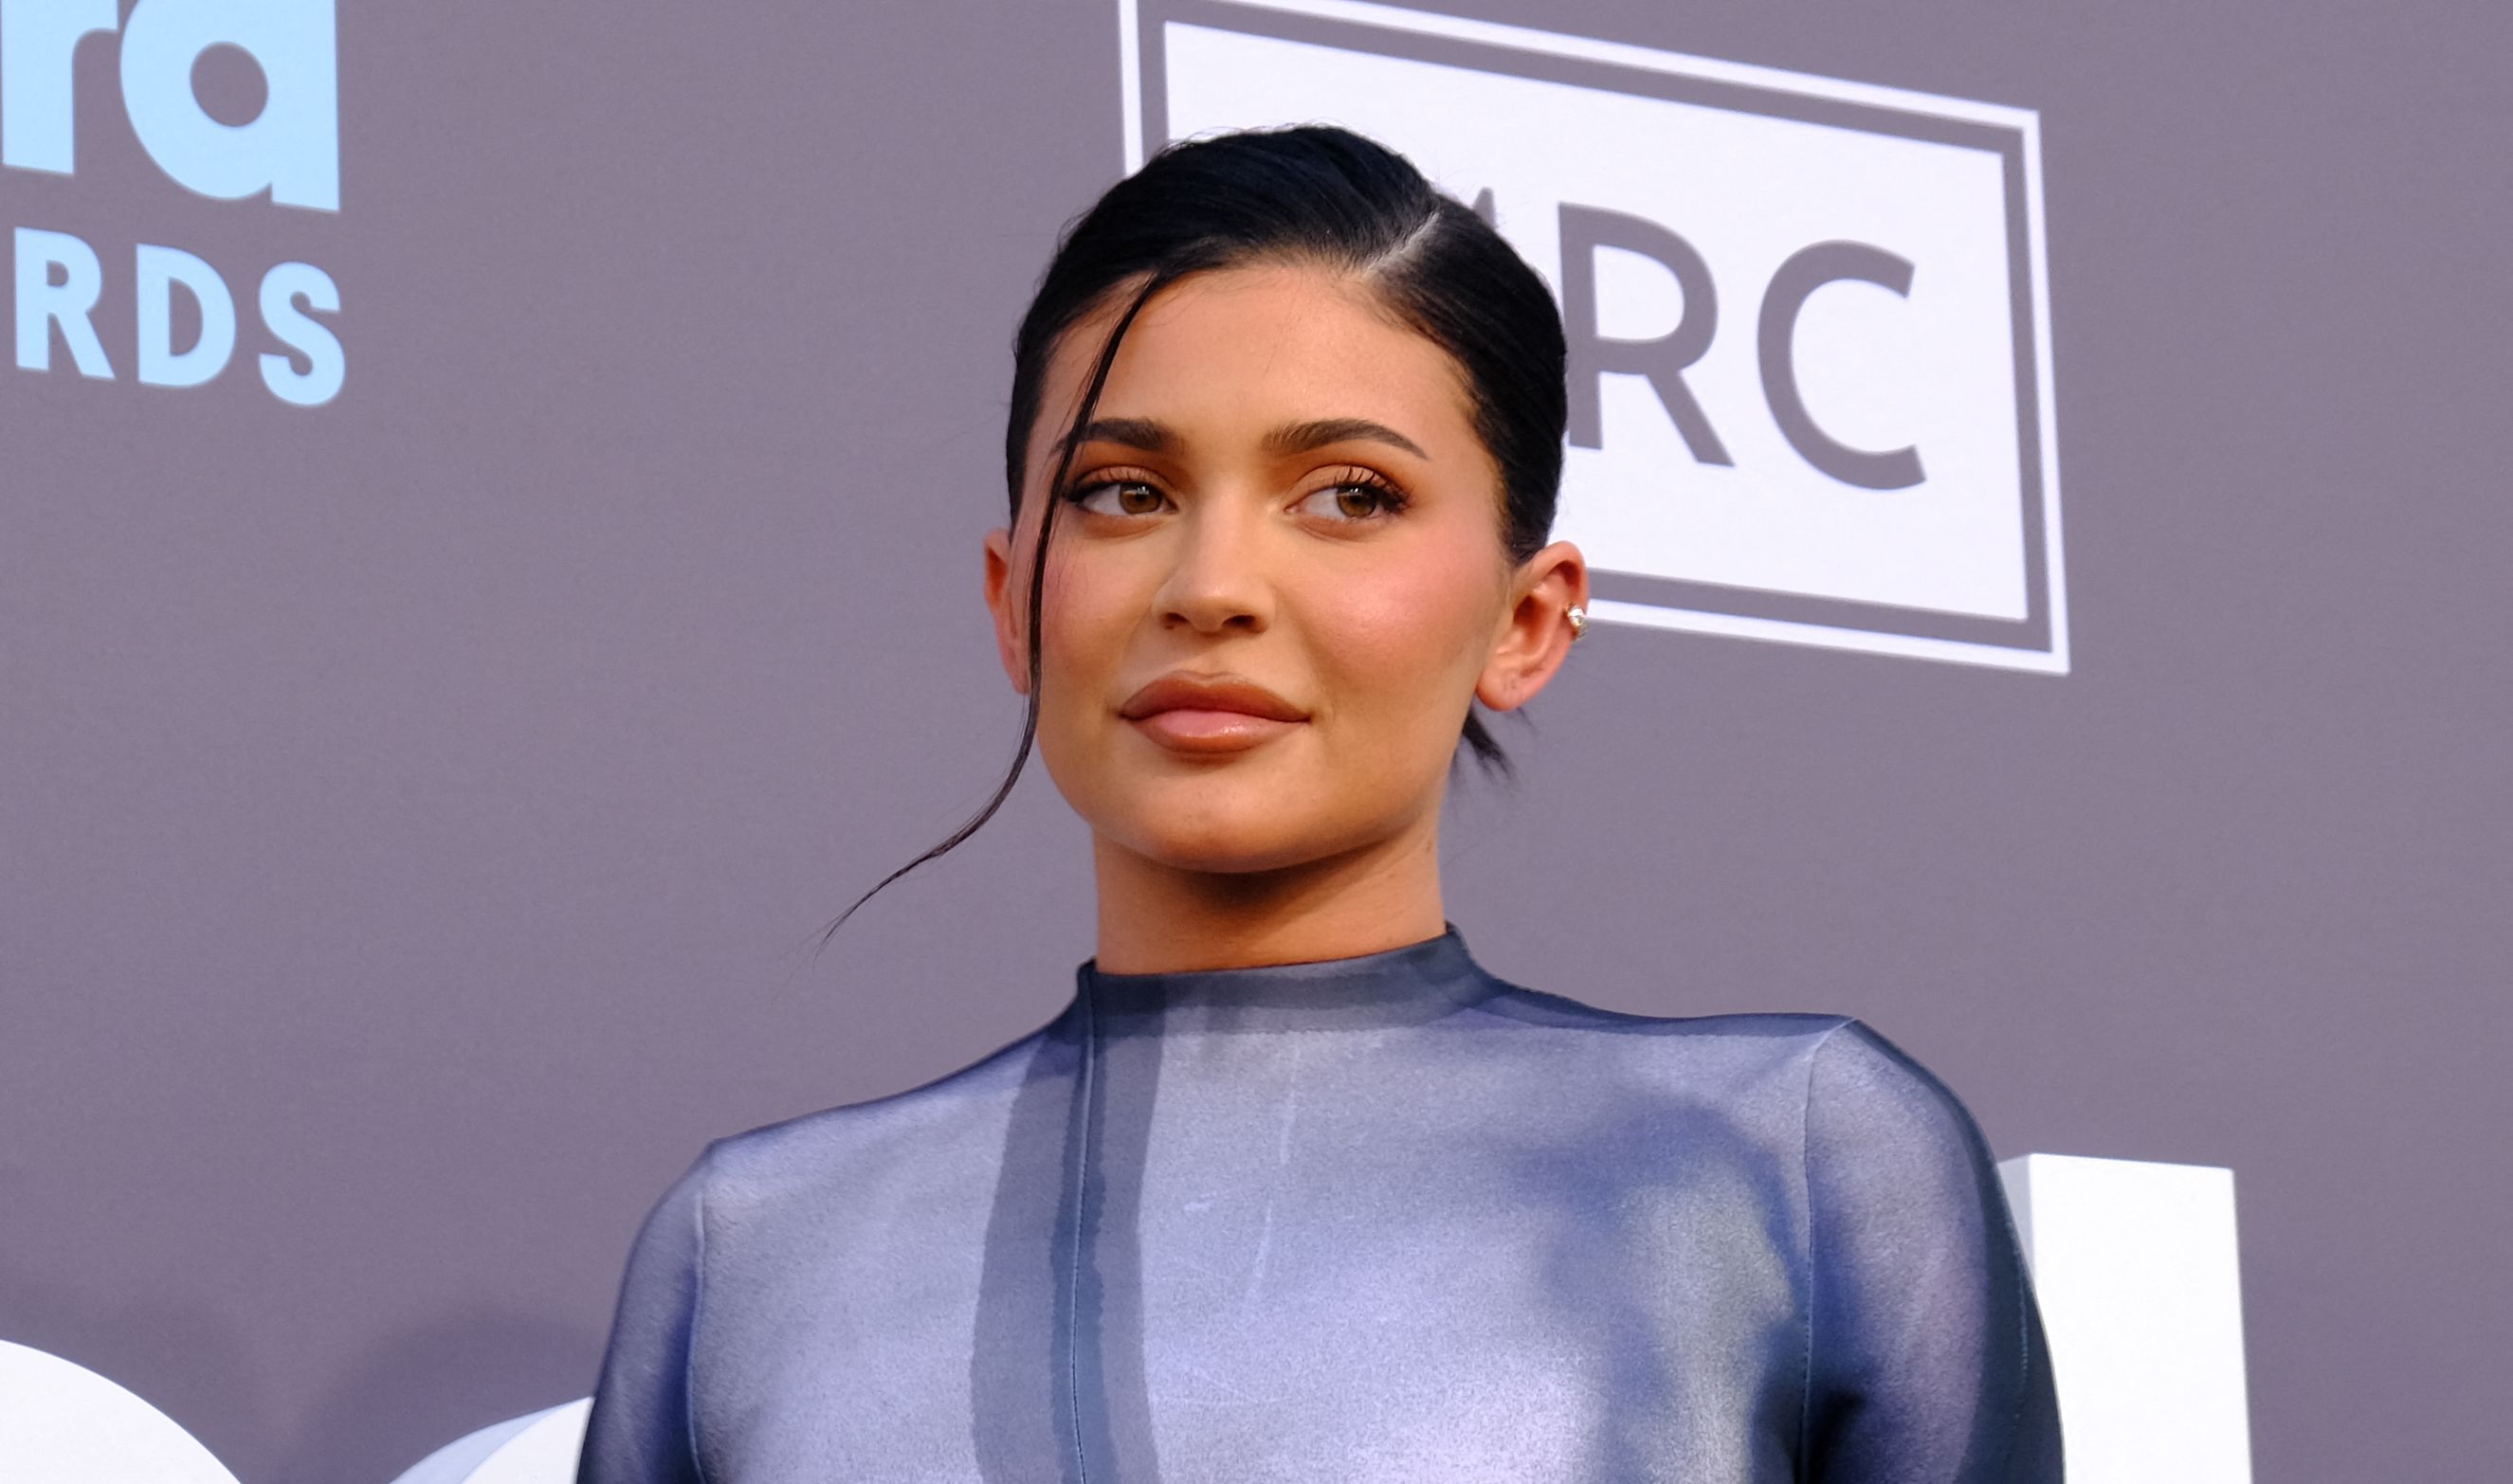 Kylie Jenner Blasted for Showing Off $450 Chopsticks During Pandemic